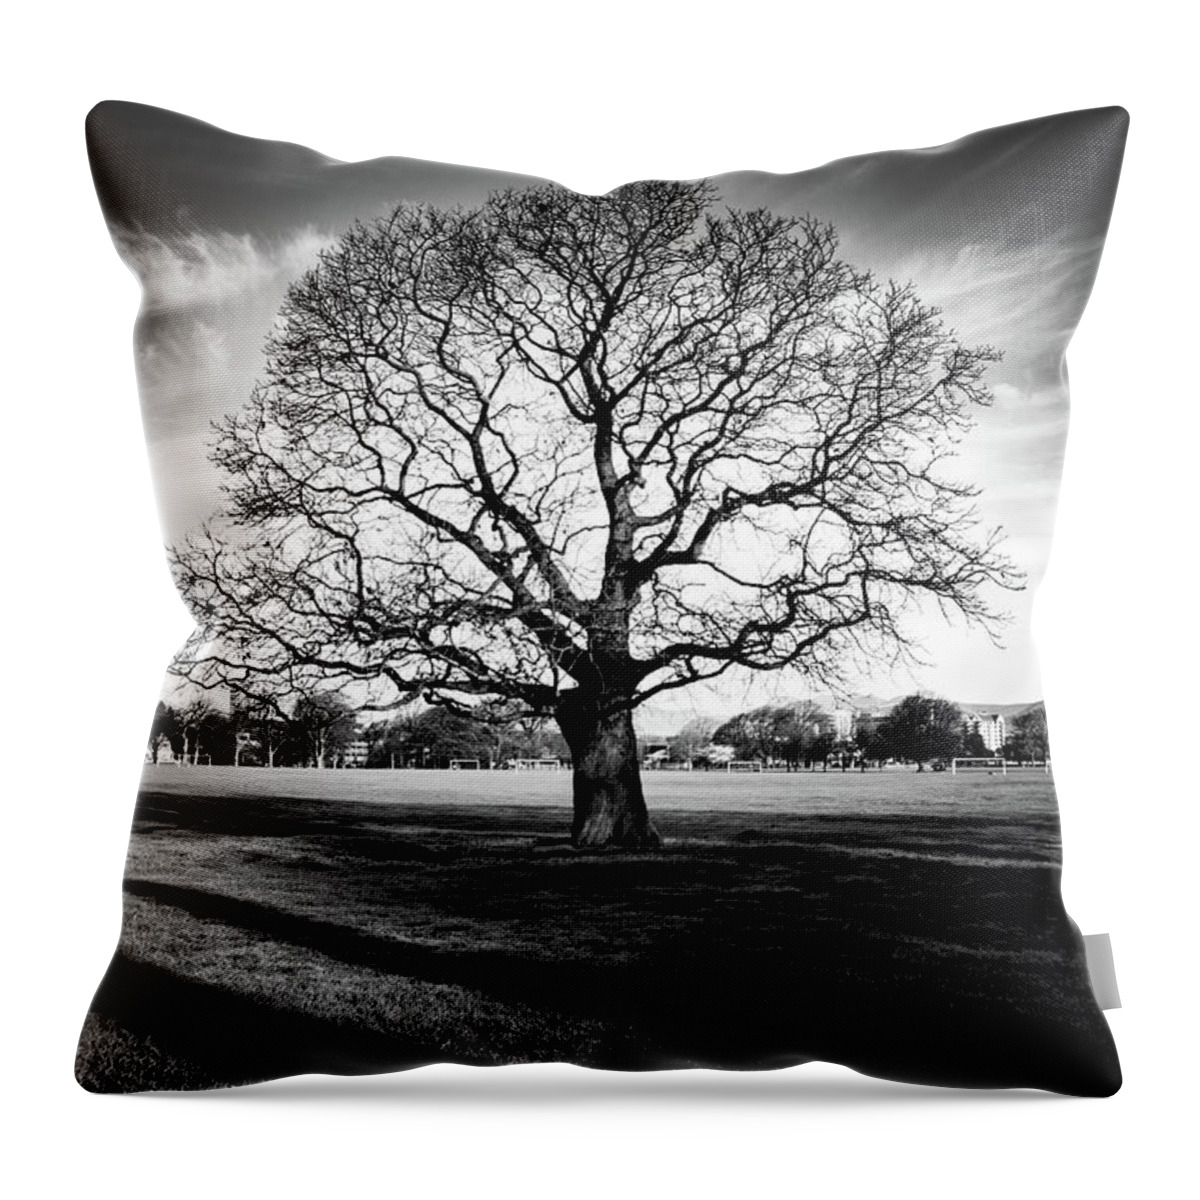 Tree Throw Pillow featuring the photograph Hagley Tree Landscape by Roseanne Jones